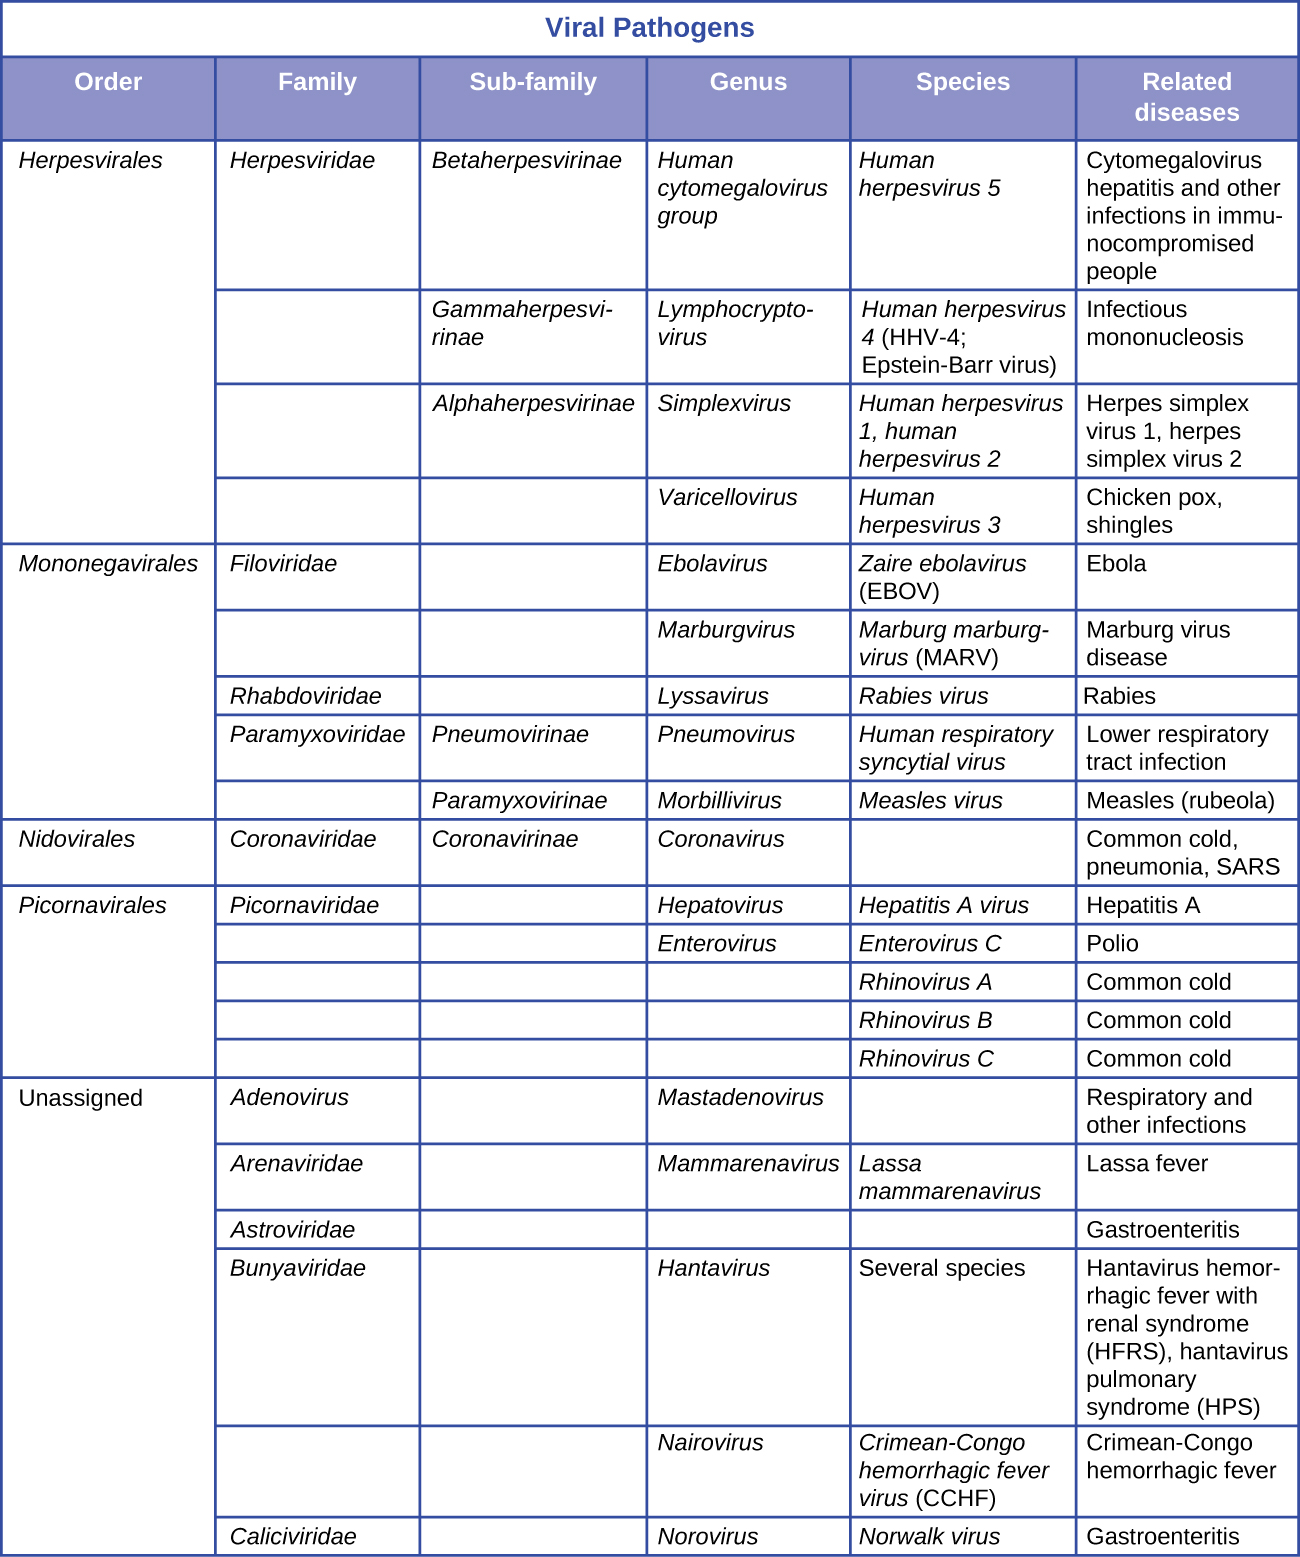 A table titled “Viral Pathogens” gives information on order, family, subfamily, genus, species, and related diseases. For order Herpesvirales, family herpesviridae, subfamily betaherpesvirinae, genus human cytomegalovirus group, species human herpesvirus 5, the related disease is Cytomegalovirus hepatitis and other infections in immunocompromised people. For order herpesvirales, family herpesviridae, subfamily gammaherpesvirinae, genus lymphocryptovirus, species human herpesvirus 4(HHV-4; Epstein-Barr virus), the related disease is infectious mononucleosis. For order Herpesvirales, family herpesviridae, subfamily alphaherpesvirinae, genus simplexvirus, species human herpesvirus 1, human herpesvirus 2, the related diseases are herpes simplex virus 1, herpes simplex virus 2. For order herpesvirales, family herpesviridae, subfamily alphaherpesvirinae, genus varicellovirus, species human herpesvirus 3, the related diseases chickenpox, shingles. For order mononegavirales, family filoviridae, subfamily alphaherpesvirinae, genus ebolavirus, species zaire ebolavirus (EBOV), the related disease is Ebola. For order mononegavirales, family filoviridae, genus marburgvirus, species Marburg marburgvirus (MARV), the related disease is Marburg virus disease. For order mononegavirales, family rhabdoviridae, genus lyssavirus, species rabies virus, the related disease is Rabies. For order mononegavirales, family paramyxoviridae, subfamily pneumovirinae, genus pneumovirus, species human respiratory syncytial virus, the related disease is lower respiratory tract infection. For order mononegavirales, family paramyxoviridae, subfamily paramyxovirinae, genus morbillivirus, species measles virus, the related disease is measles (rubeola). For order Nidovirales, family coronaviridae, subfamily coronavirinae, genus coronavirus, the related diseases are common cold, pneumonia, SARS. For order picornavirales, family picornaviridae, genus hepatovirus, species hepatitis A virus, the related disease is hepatitis A. For order picornavirales, family picornaviridae, genus enterovirus, species enterovirus C, the related disease is polio. For order picornavirales, family picornaviridae, genus enterovirus, species rhinovirus A, the related disease is common cold. For order picornavirales, family picornaviridae, genus enterovirus, species rhinovirus B, the related disease is common cold. For order picornavirales, family picornaviridae, genus enterovirus, species rhinovirus C, the related disease is common cold. The remaining entries in this table are unassigned in the order category. In the family adenovirus, genus mastadenovirus, the related diseases are respiratory and other infections. In the family arenaviridae, genus mammarenavirus, species lassa mammarenavirus, the related disease is Lassa fever. For the family astroviridae, the related disease is gastroenteritis. For the family bunyaviridae, genus hantavirus, species several species, the related diseases are hantavirus hemorrhagic fever with renal syndrome (HFRS), hantavirus pulmonary syndrome (HPS). For family Bunyaviridae, genus nairovirus, species Crimean-congo hemorrhagic fever virus (CCHF), the related disease is Crimean-Congo hemorrhagic fever. For the family caliciviridae, genus norovirus, species Norwalk virus, the related disease is gastroenteritis.